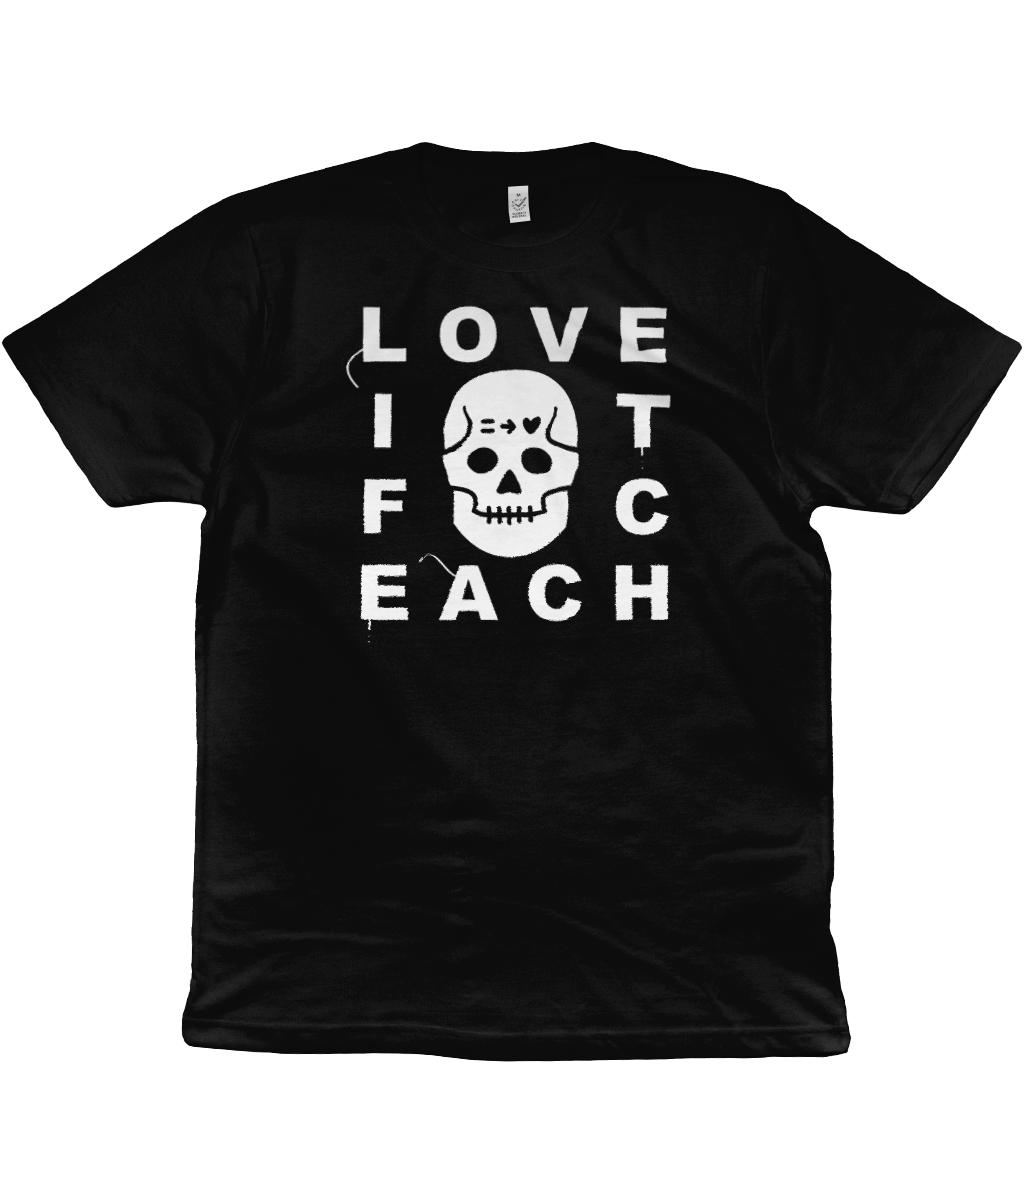 Unisex 'Love Life Each Etch' with Sick Majestic Skull Tee (Black)